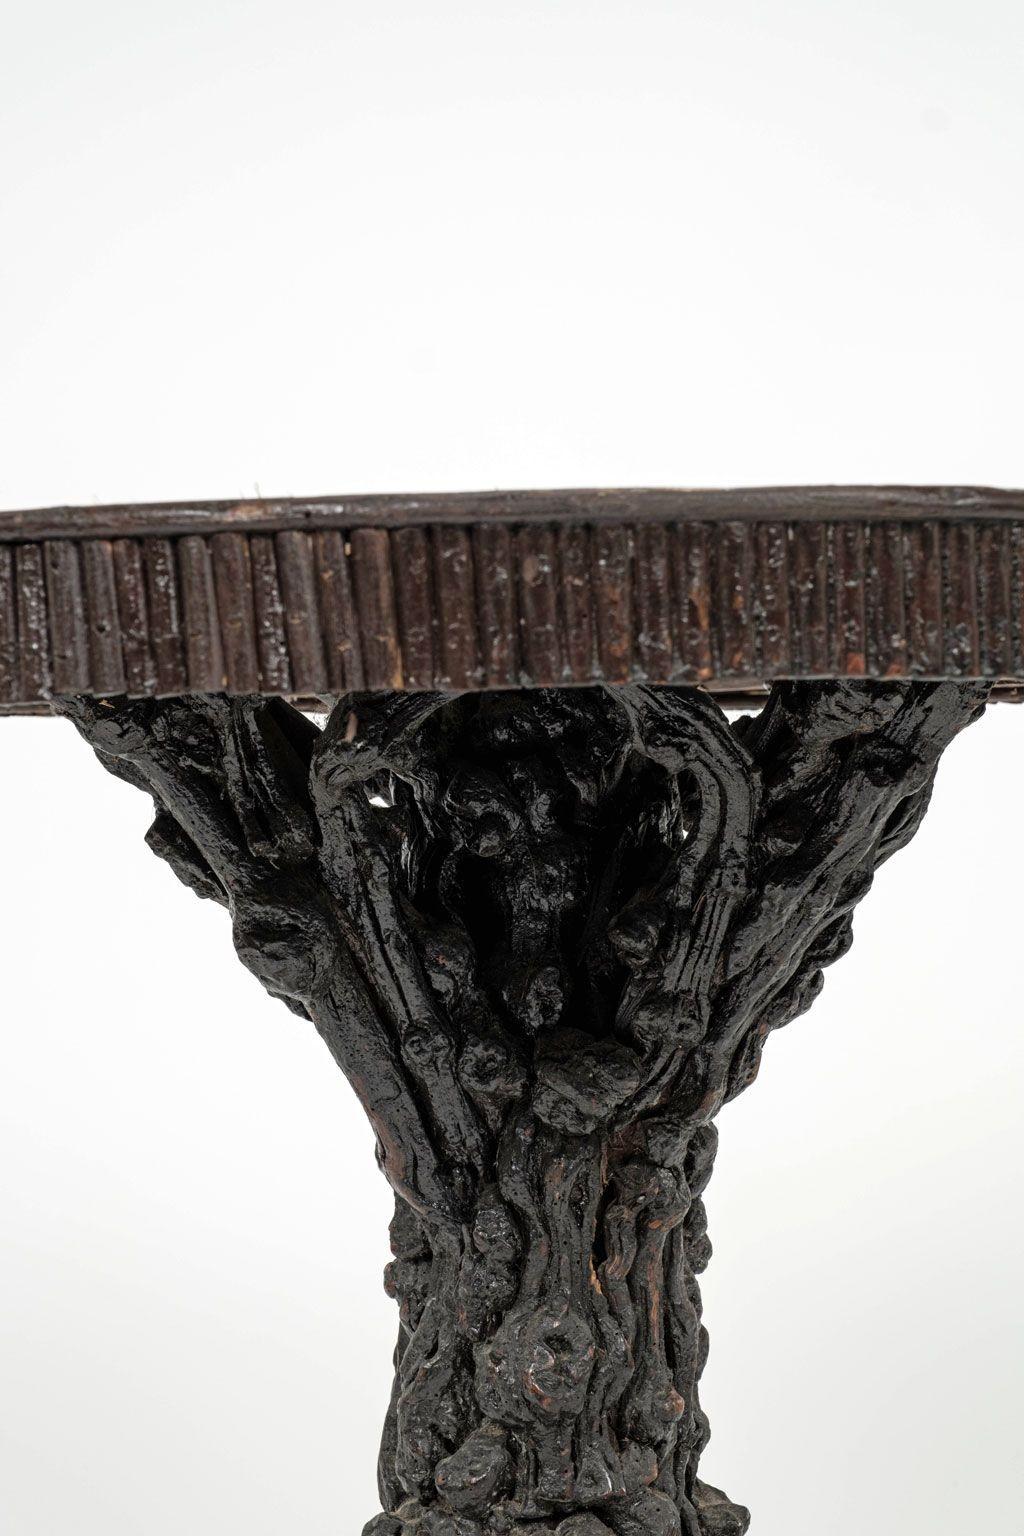 Rustic folk art gueridon hand-crafted hand-crafted circa 1880-1910 in France. This art populaire center table is composed of natural, rough-textured elements. A gnarly root wood base supports a generously-sized round top, decorated in small pieces